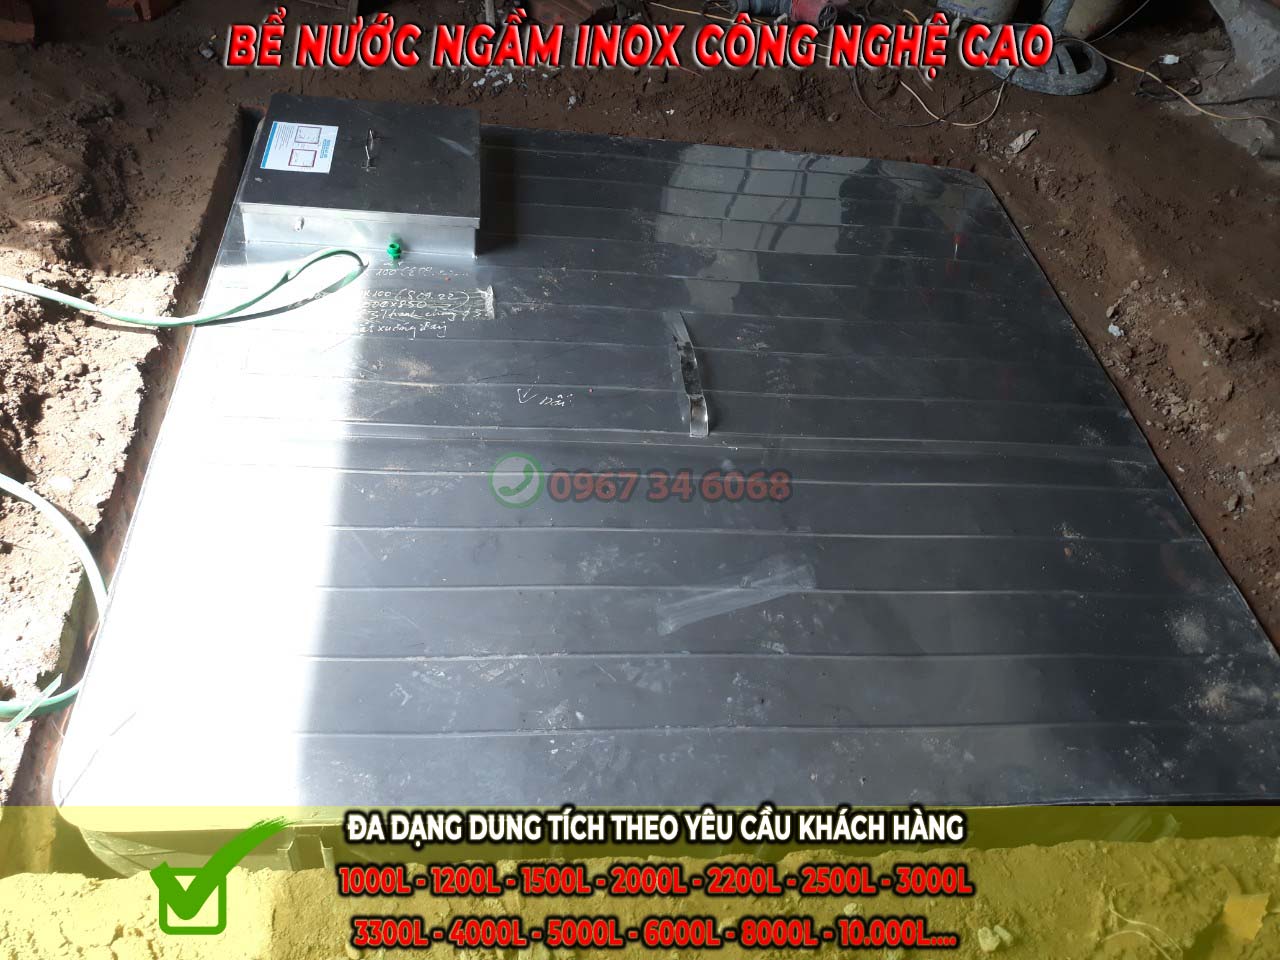 BE-NUOC-NGAM-INOX-CONG-NGHE-CAO-6.jpg